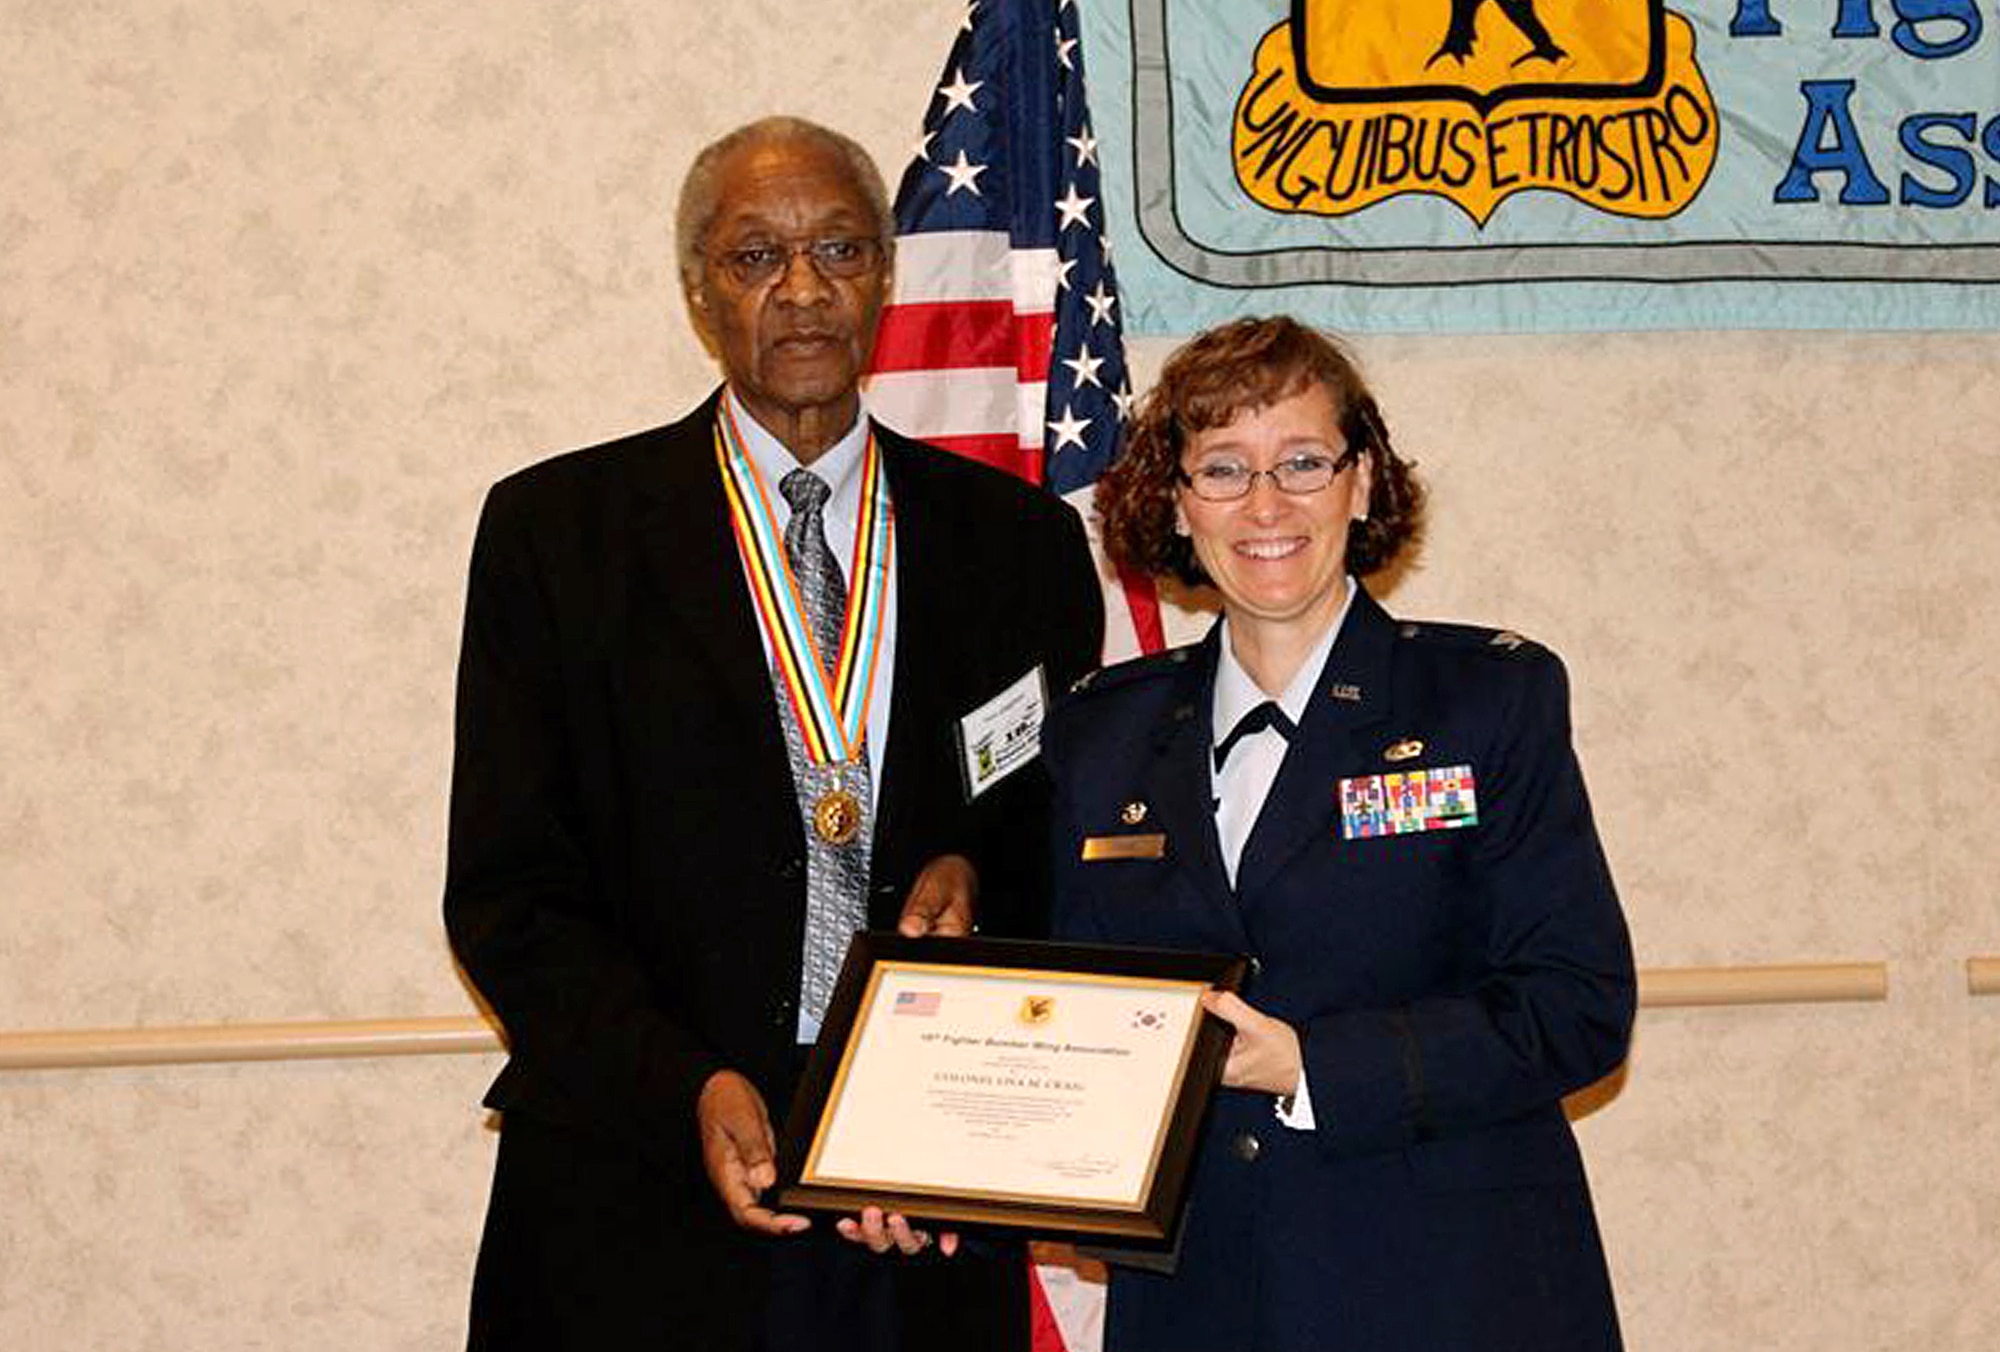 Tom Chapman, 18th Fighter Bomb Wing Association president, thanks Col. Lisa Craig, 433rd Mission Support Group commander, for speaking at the 18th FBW reunion dinner Oct. 24 at the Double Tree Hotel San Antonio, Texas. Twenty-five Korean War veterans were honored with the Republic of Korea Ambassador for Peace Medal, a commemorative medal produced by the Korean Government as an expression of gratitude and honor to America's Korean War veterans. (Photo by Susan Kee) (released)